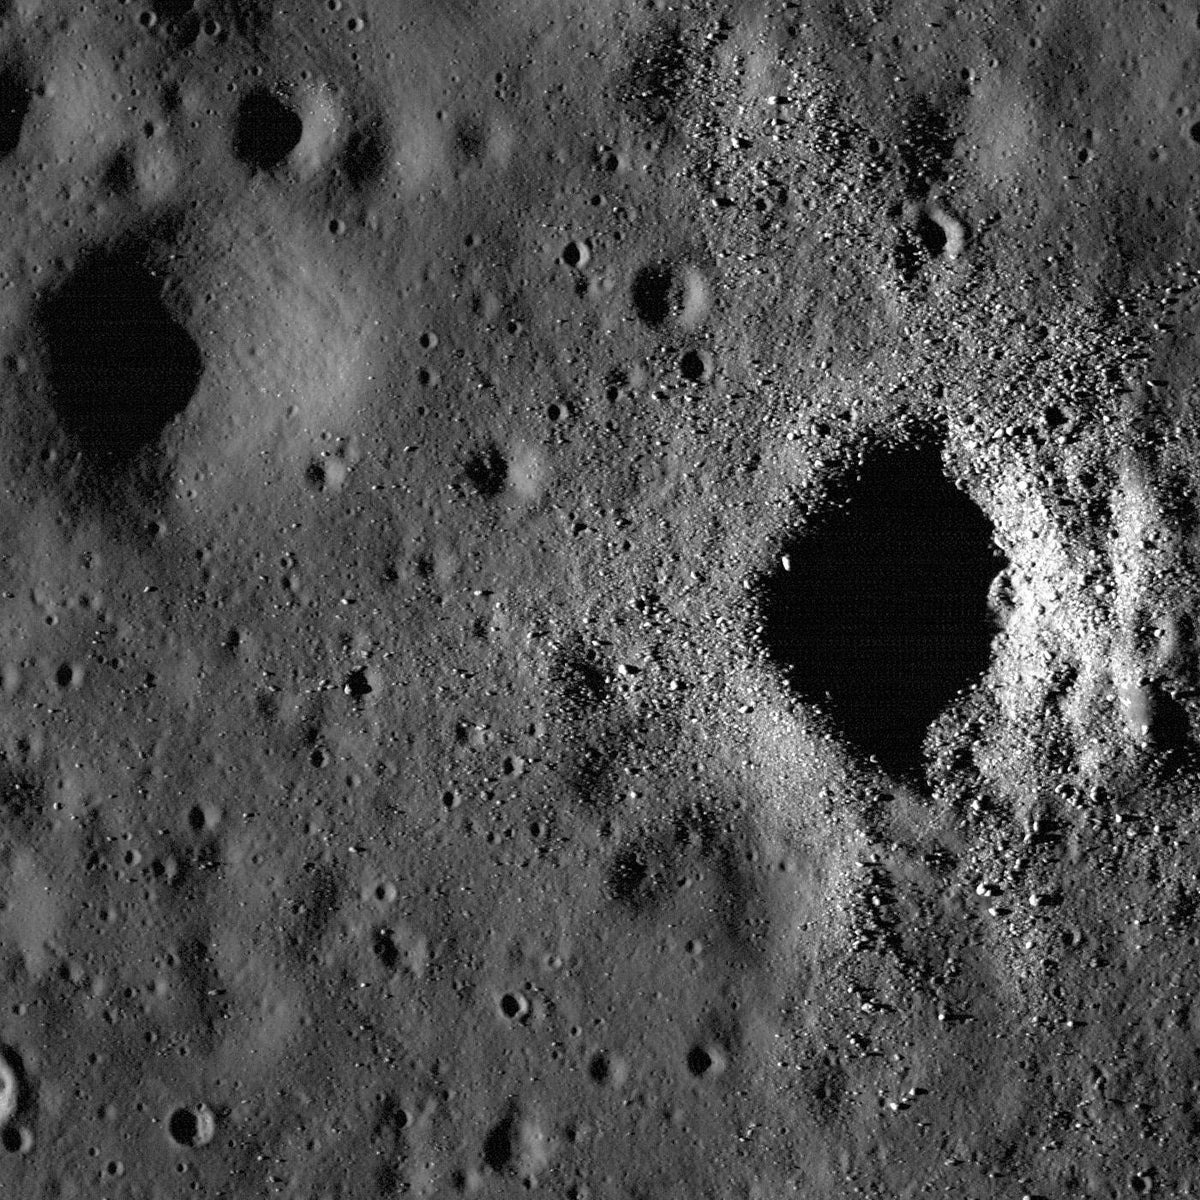 A Chinese lunar lander found water on the Moon — and now we know where it came from.